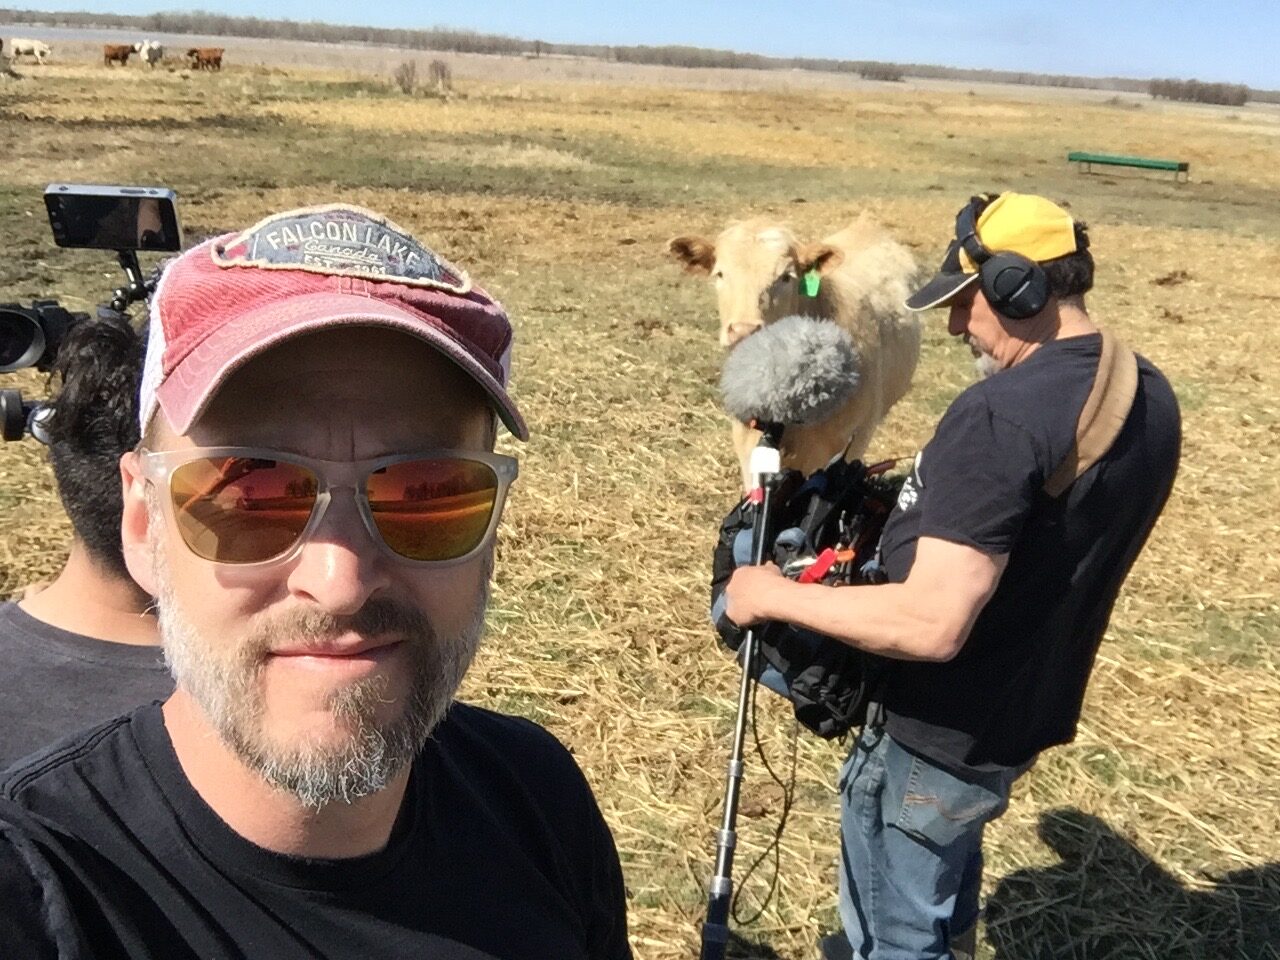 Jeff Newman takes a selfie with his film crew behind him filming a herd of cows